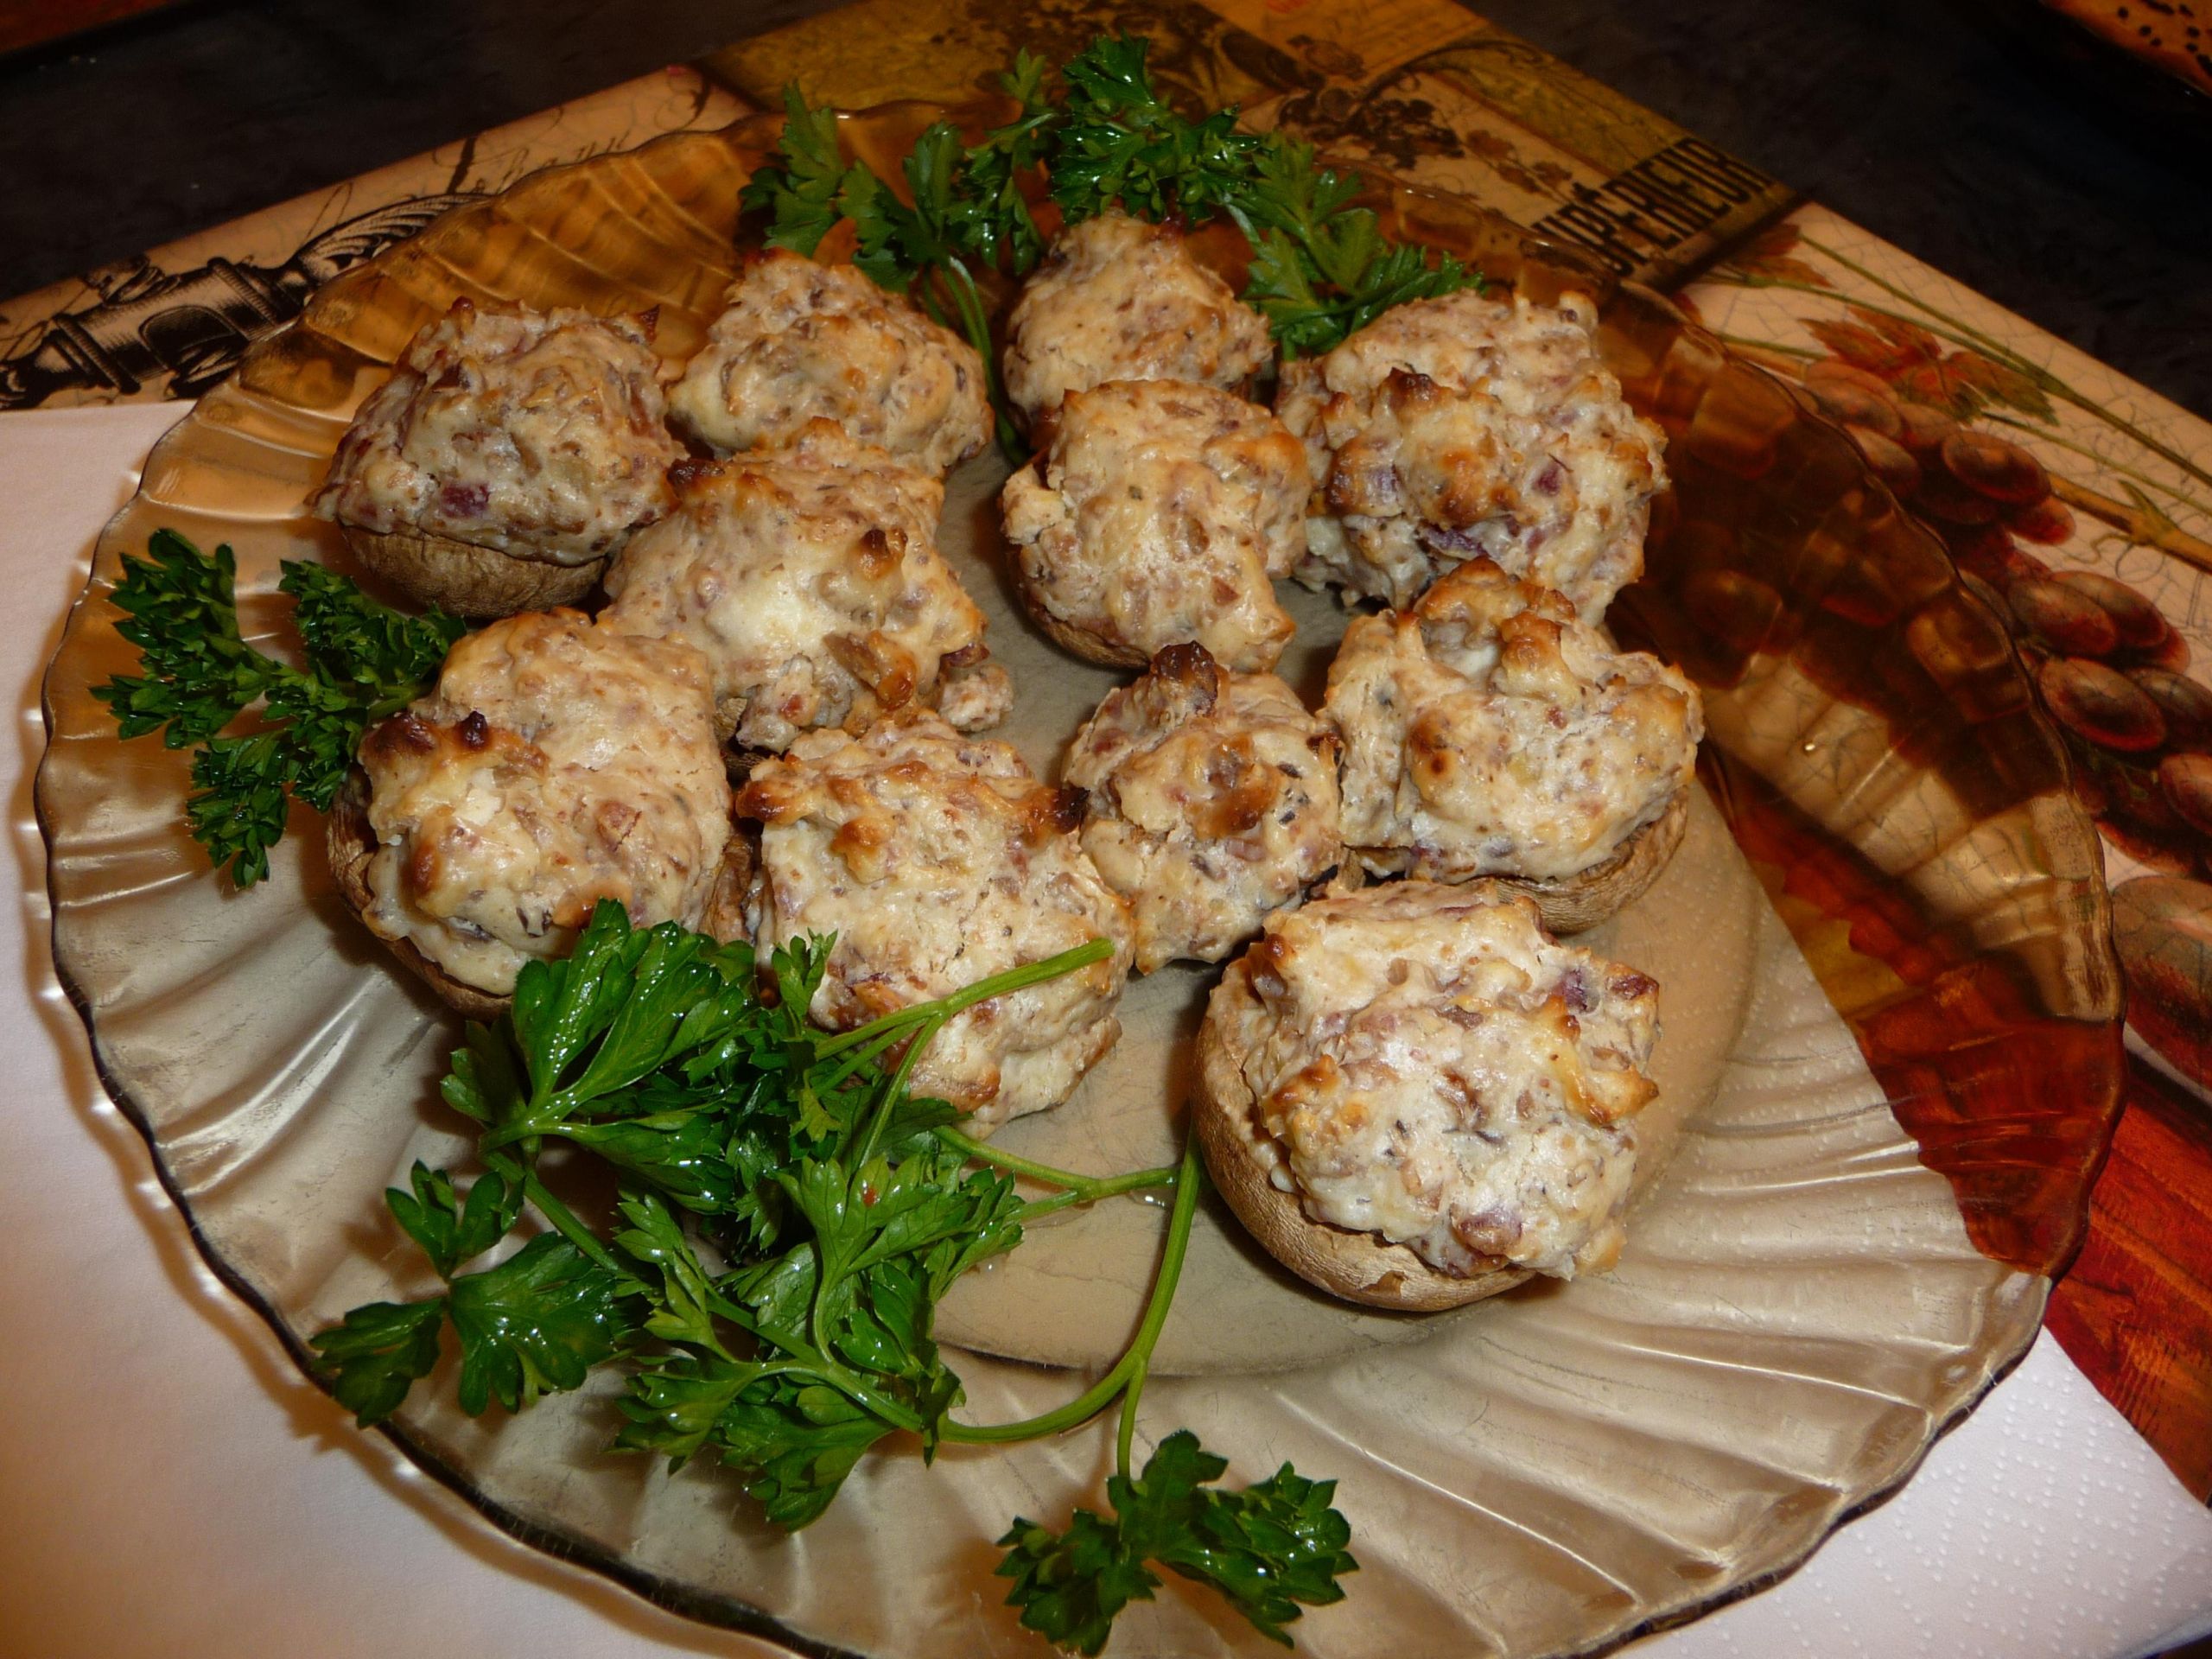 Stuffed Mushrooms With Cream Cheese And Bacon
 Gluten Free Stuffed Mushrooms with Cream Cheese and Bacon